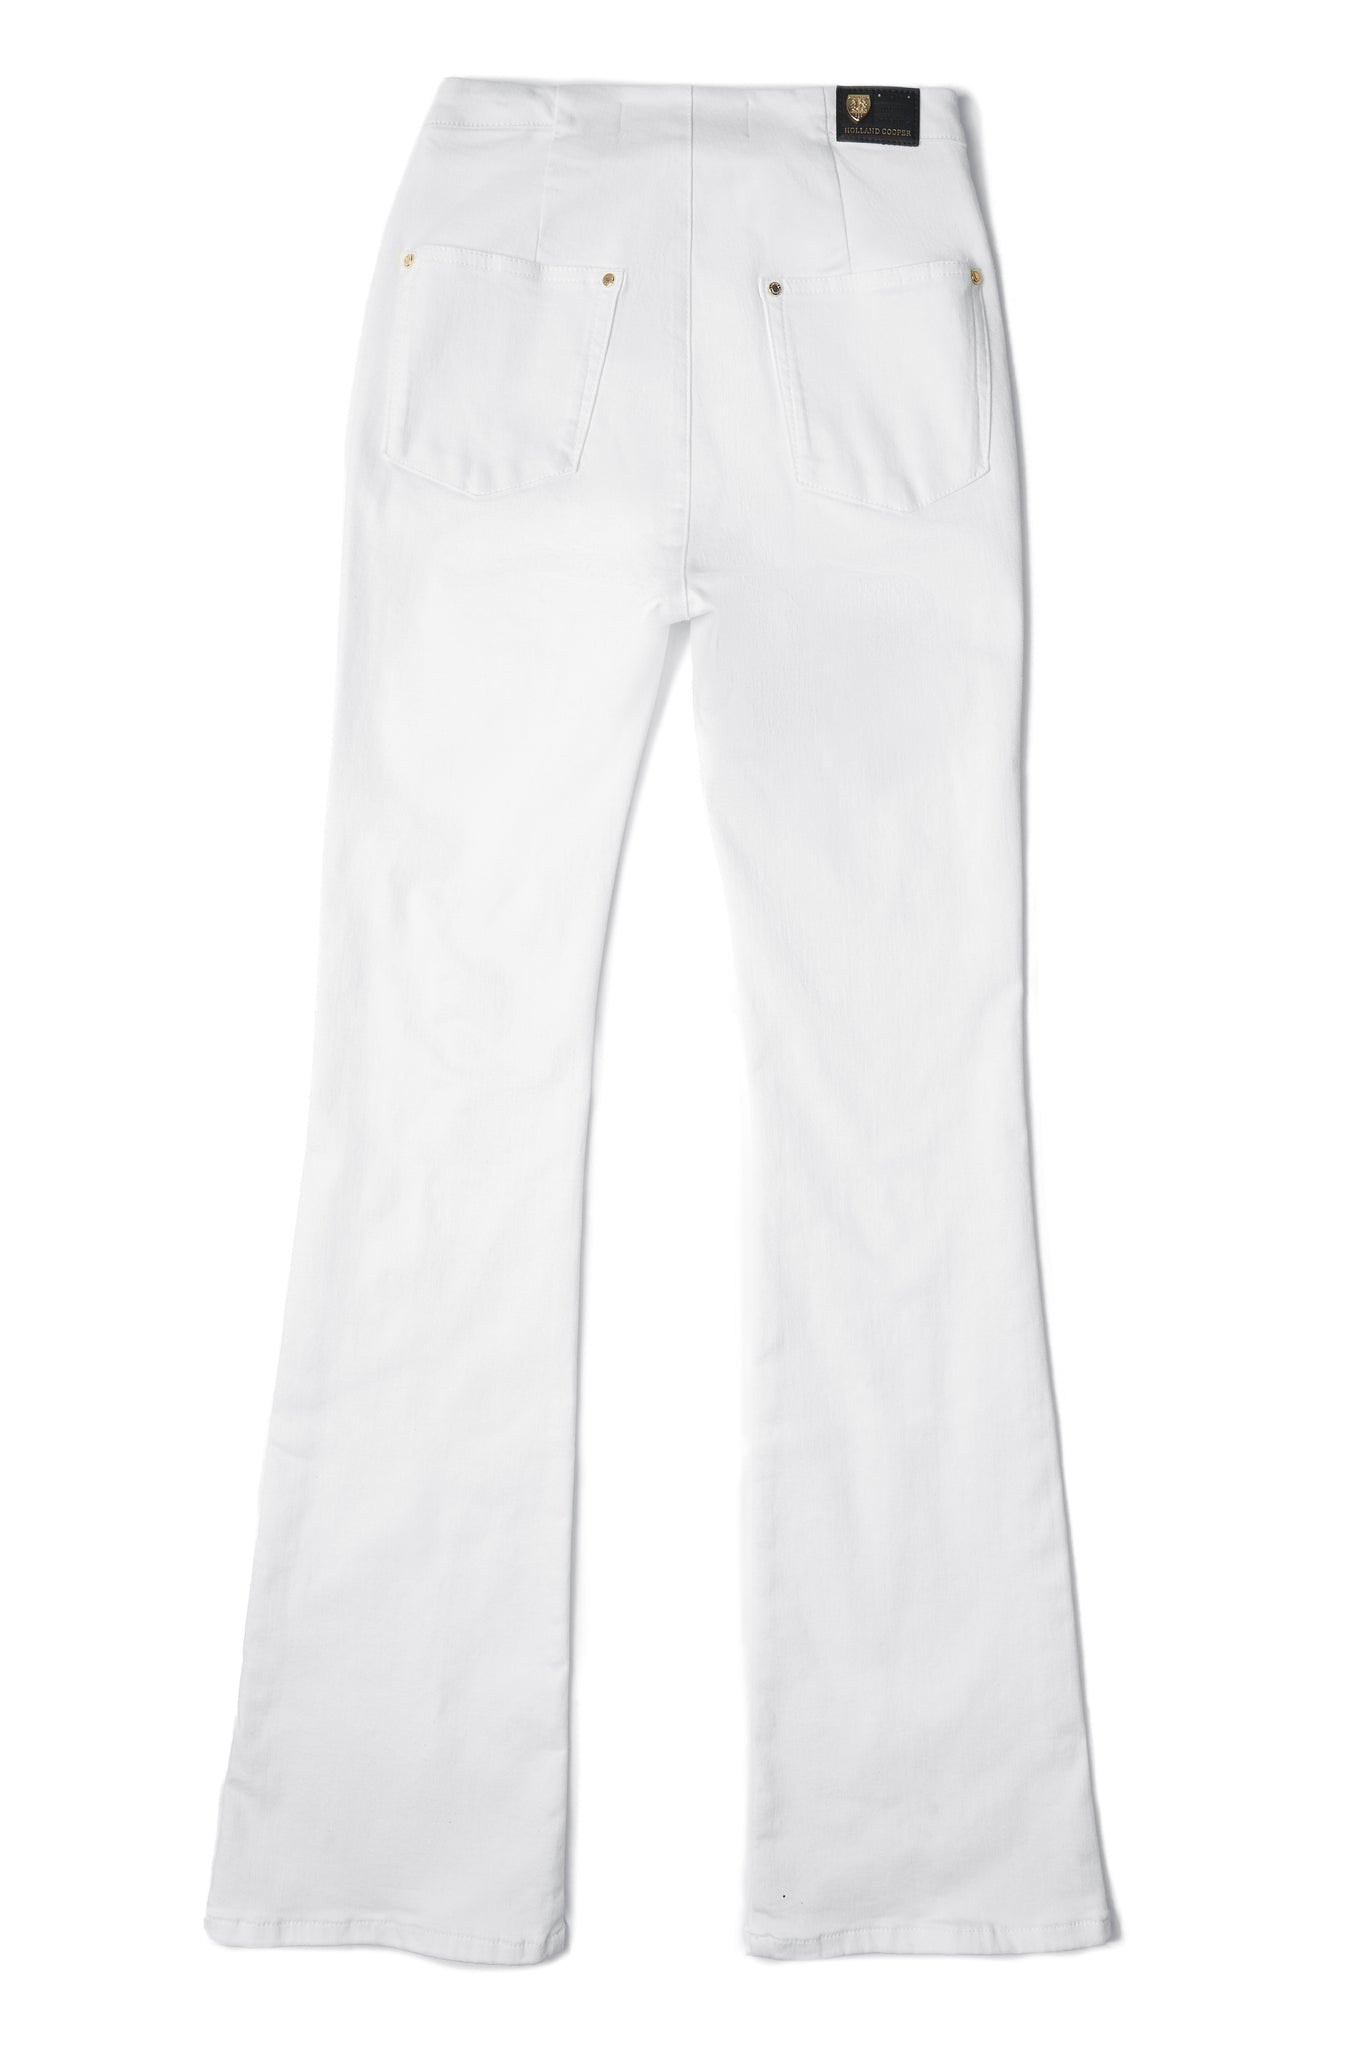 back of womens high rise white flared denim jeans with side zip entry and sailor style front with gold rivets to the front pockets